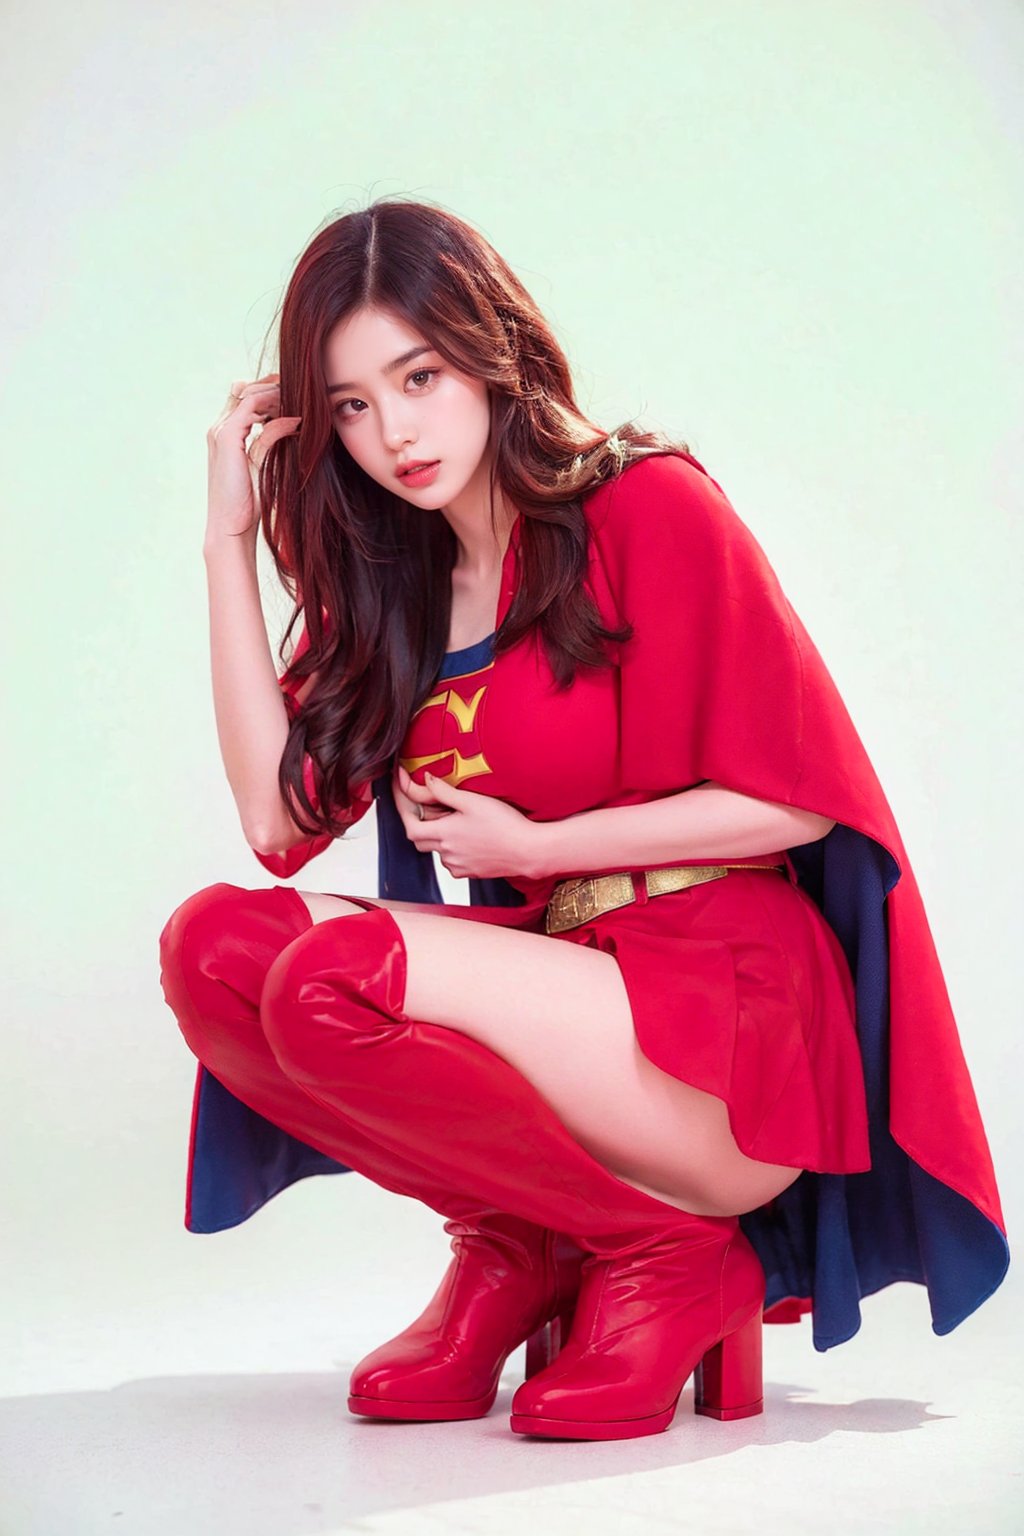 Supergirl, Red knee-high heel boots, Supergirl's tight uniform, Red miniskirt, The red cloak, White background, Whole body, Giant chests, Chinese girl, full body, Red knee-high heel boots, Supergirl even wears the system, Half squatting on the ground,Black stockings,Fake breasts,frey4